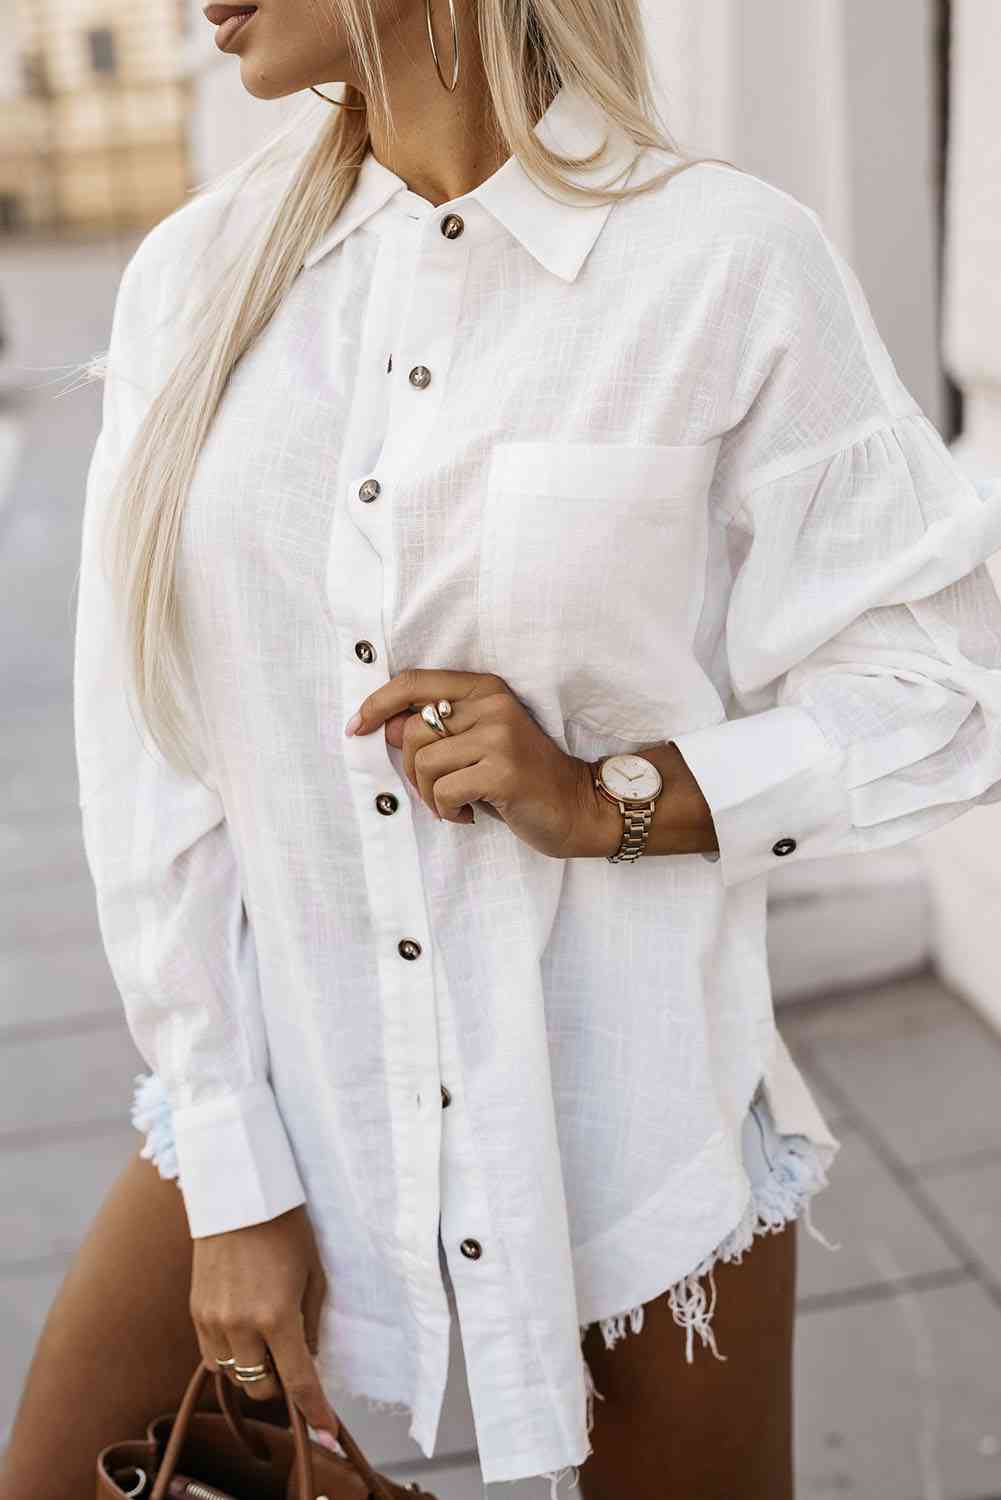 Pearl Mist Button Down 100% Cotton Shirt | Hypoallergenic - Allergy Friendly - Naturally Free